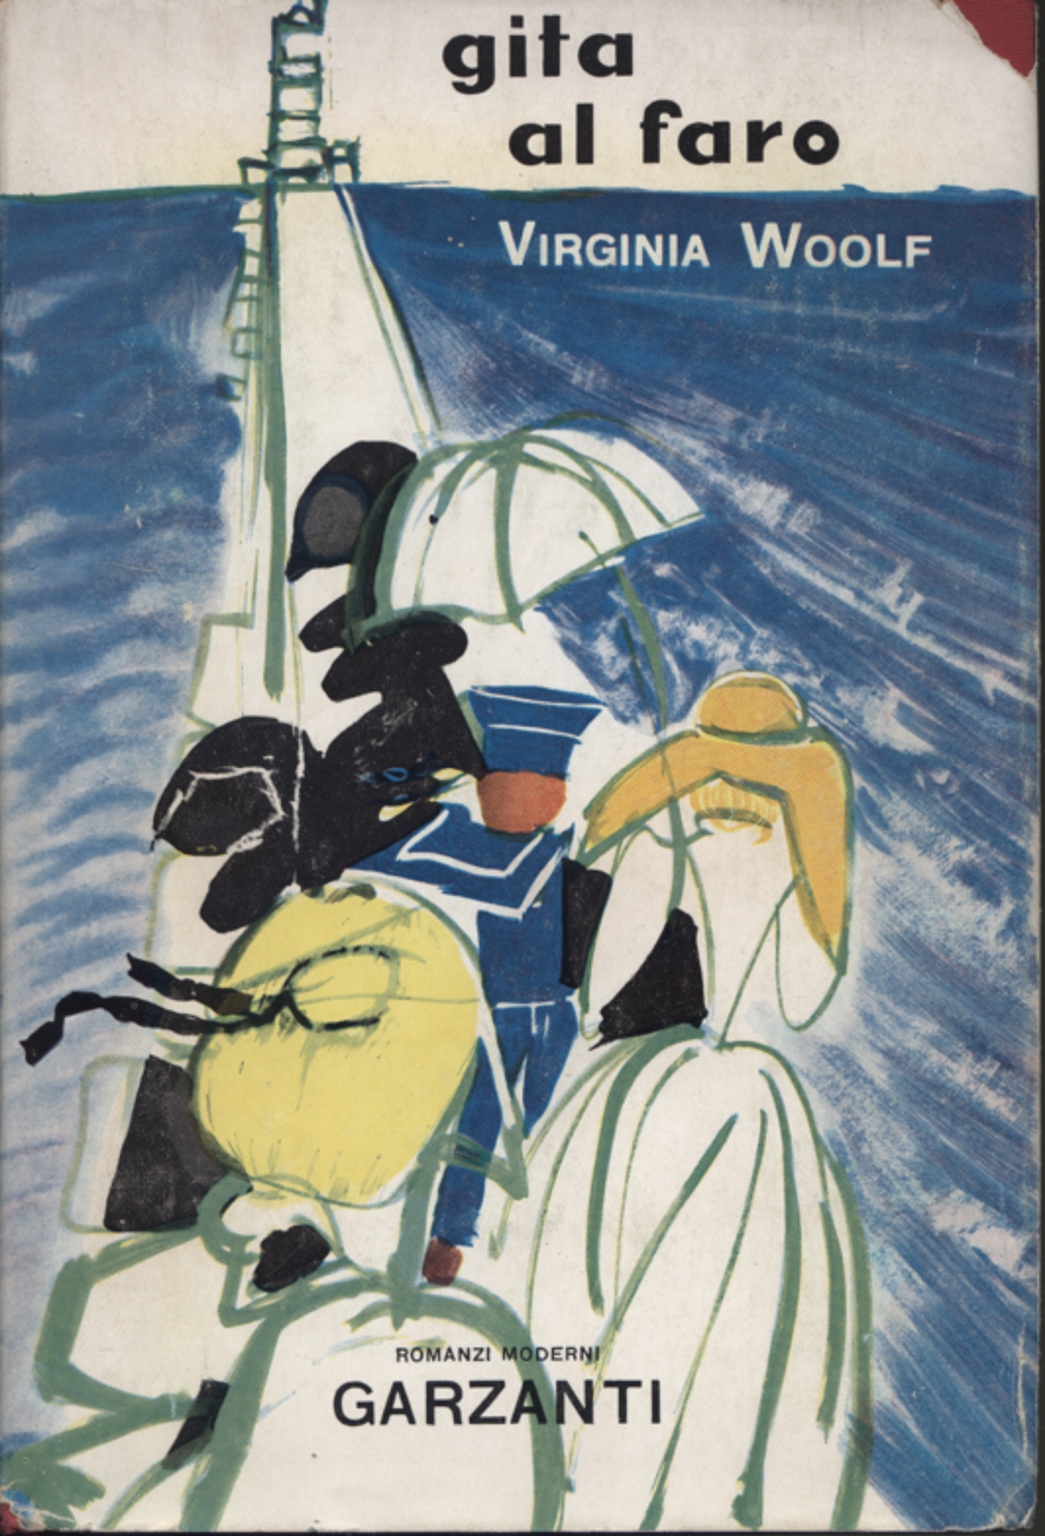 Trip to the lighthouse, Virginia Woolf